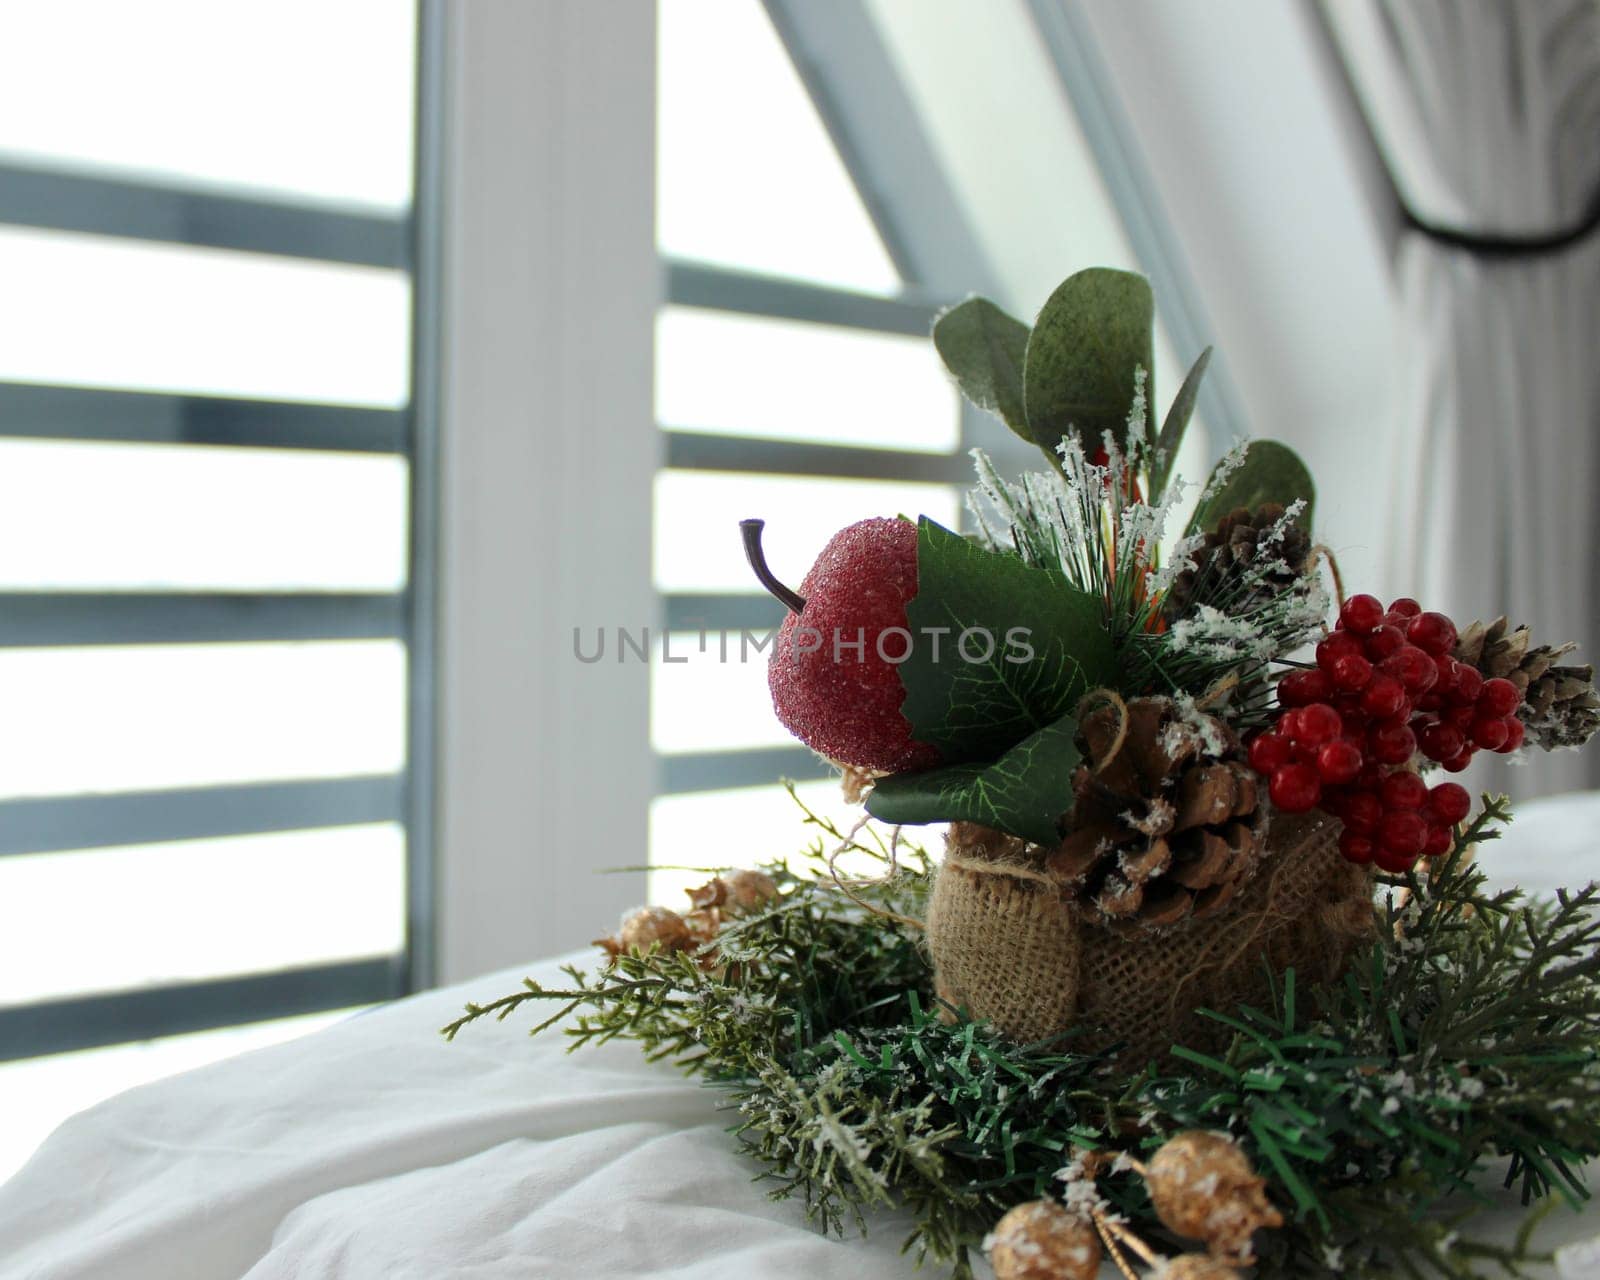 decorative composition on a snow-white bed against the background of a window overlooking a mountainous landscape in winter. High quality photo